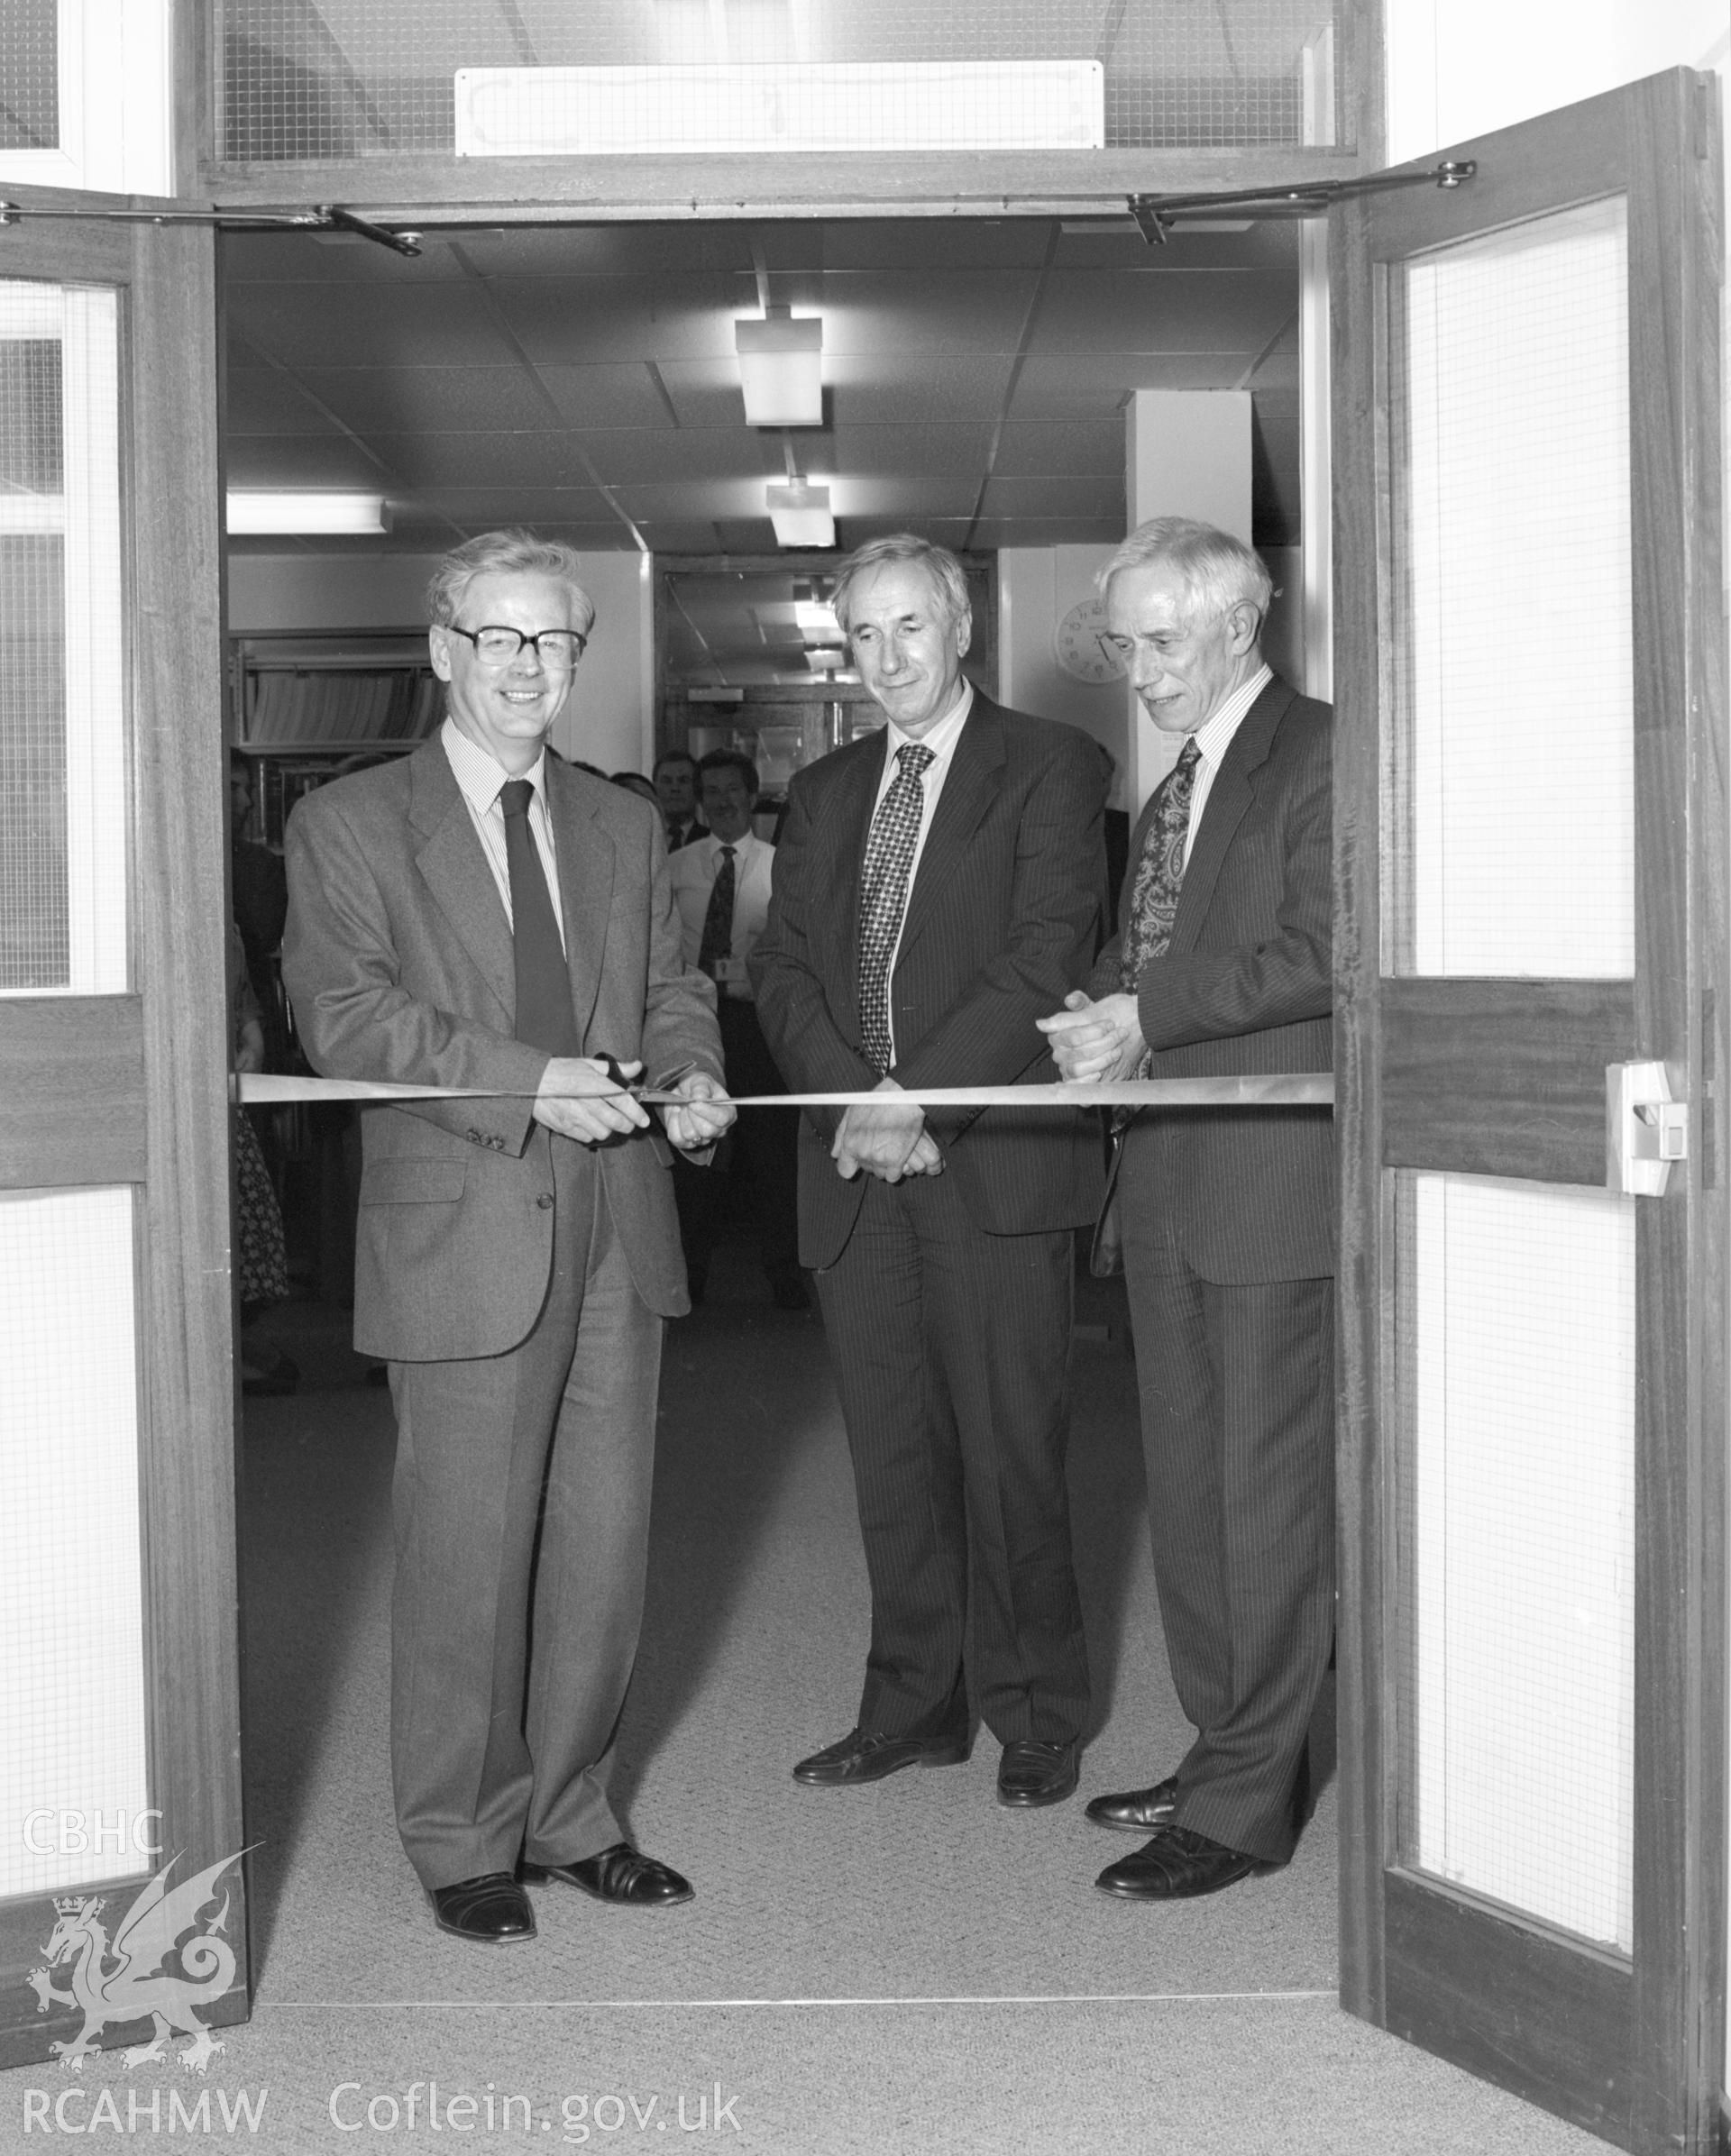 Opening of the NMR reading room, 17 May 1996. NA/GEN/97/005